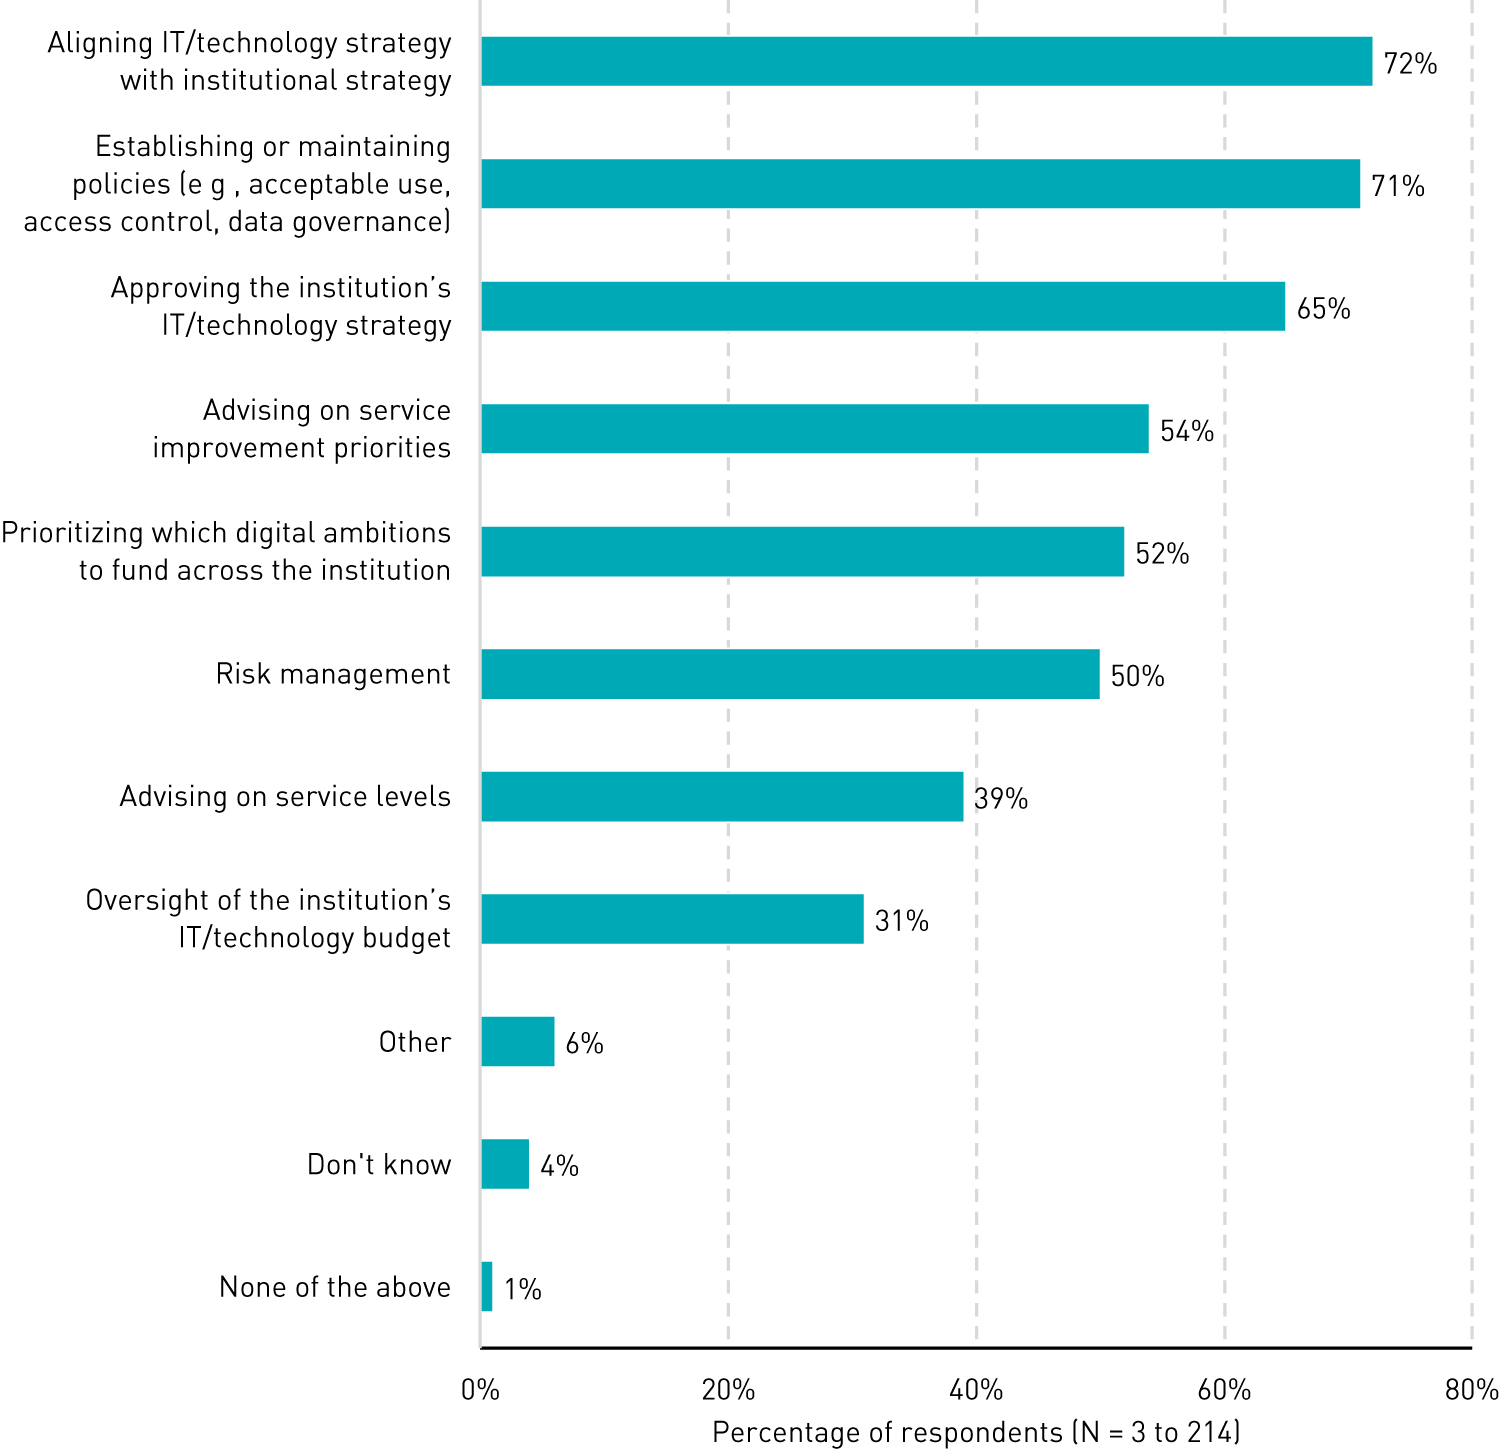 Bar chart showing percentage of respondents who said they are responsible for certain job duties: Aligning IT/technology strategy with institutional strategy (72%), Establishing or maintaining policies (e.g., acceptable use, access control, data governance) (71%), Approving the institution’s IT/technology strategy (65%), Advising on service improvement priorities (54%), Prioritizing which digital ambitions to fund across the institution (52%), Risk management (50%), Advising on service levels (39%), Oversight of the institution’s IT/technology budget (31%), Other (6%), Don’t know (4%), None of the above (1%).